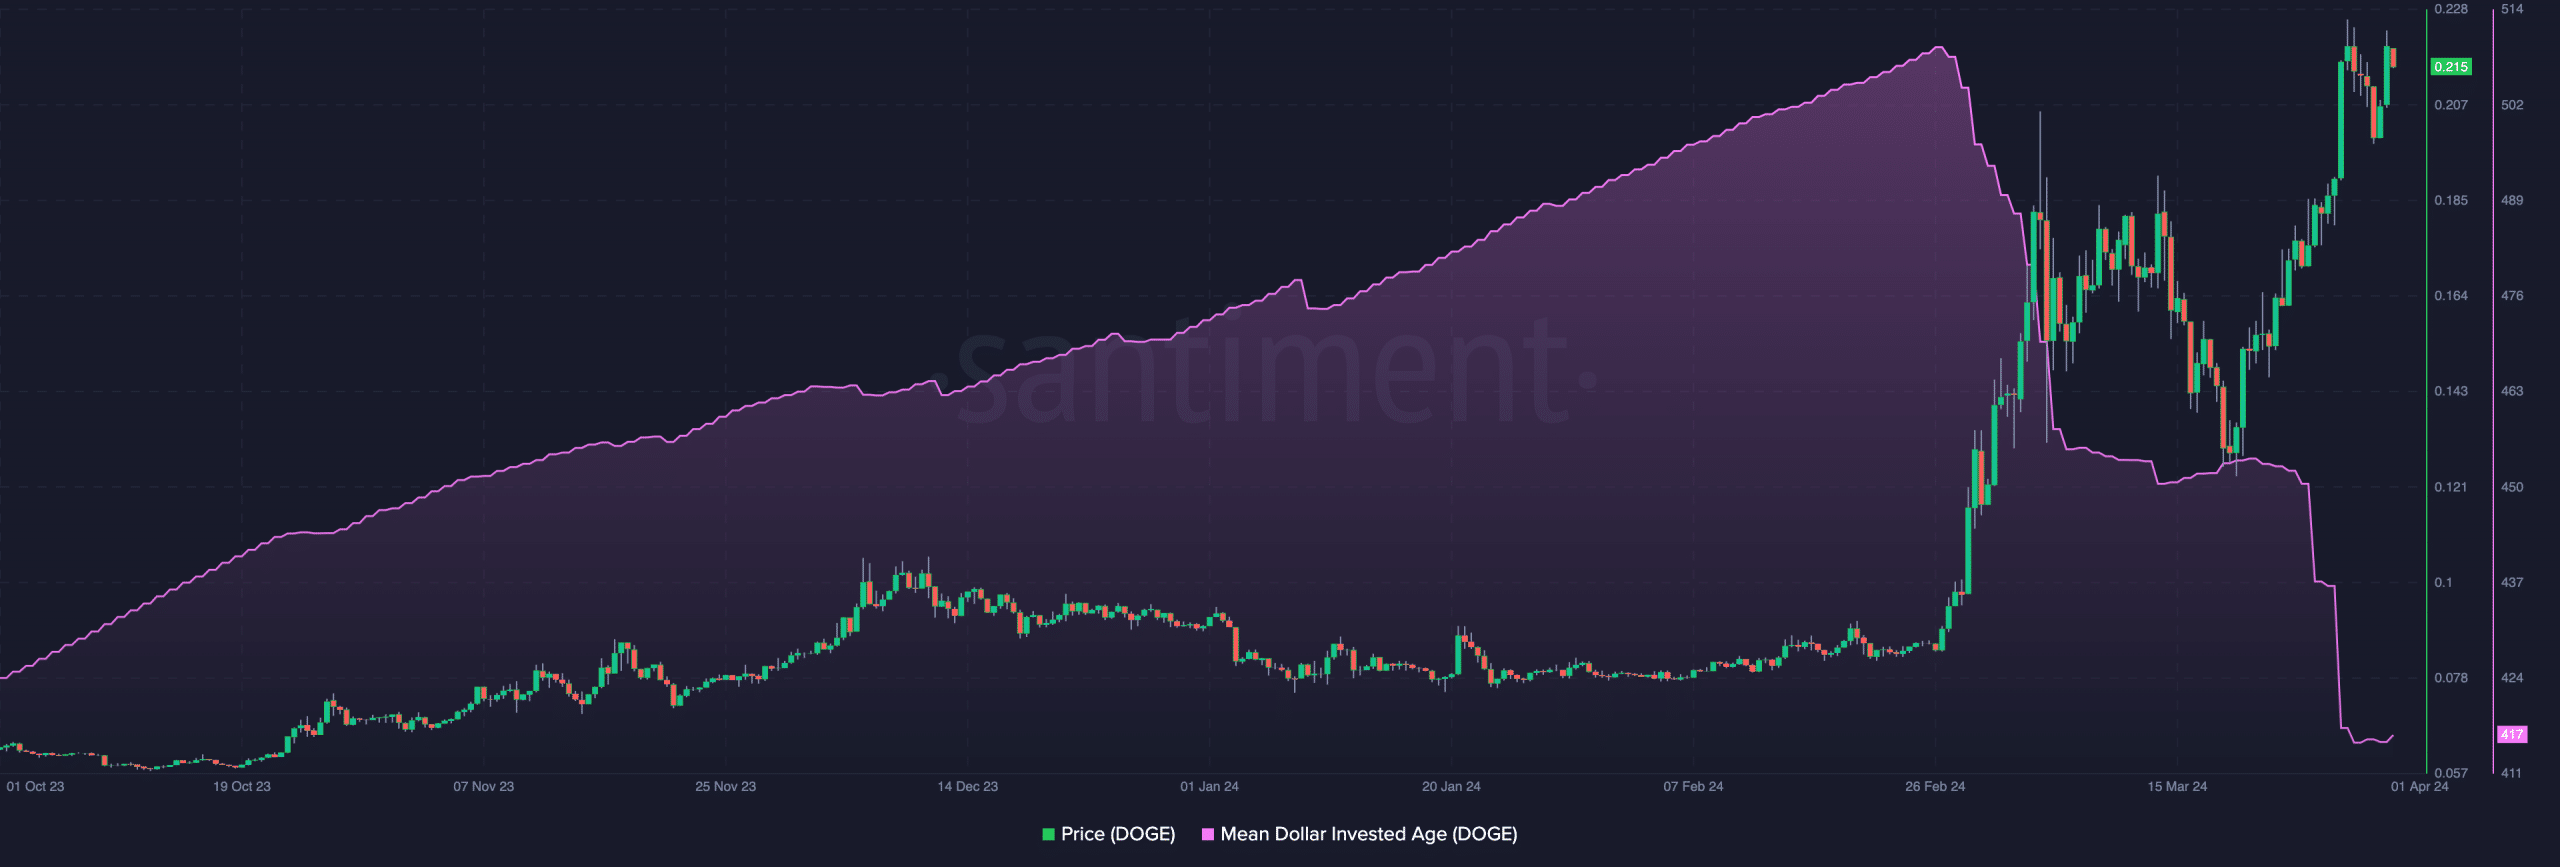 Dogecoin's on-chain analysis predicting a price increase